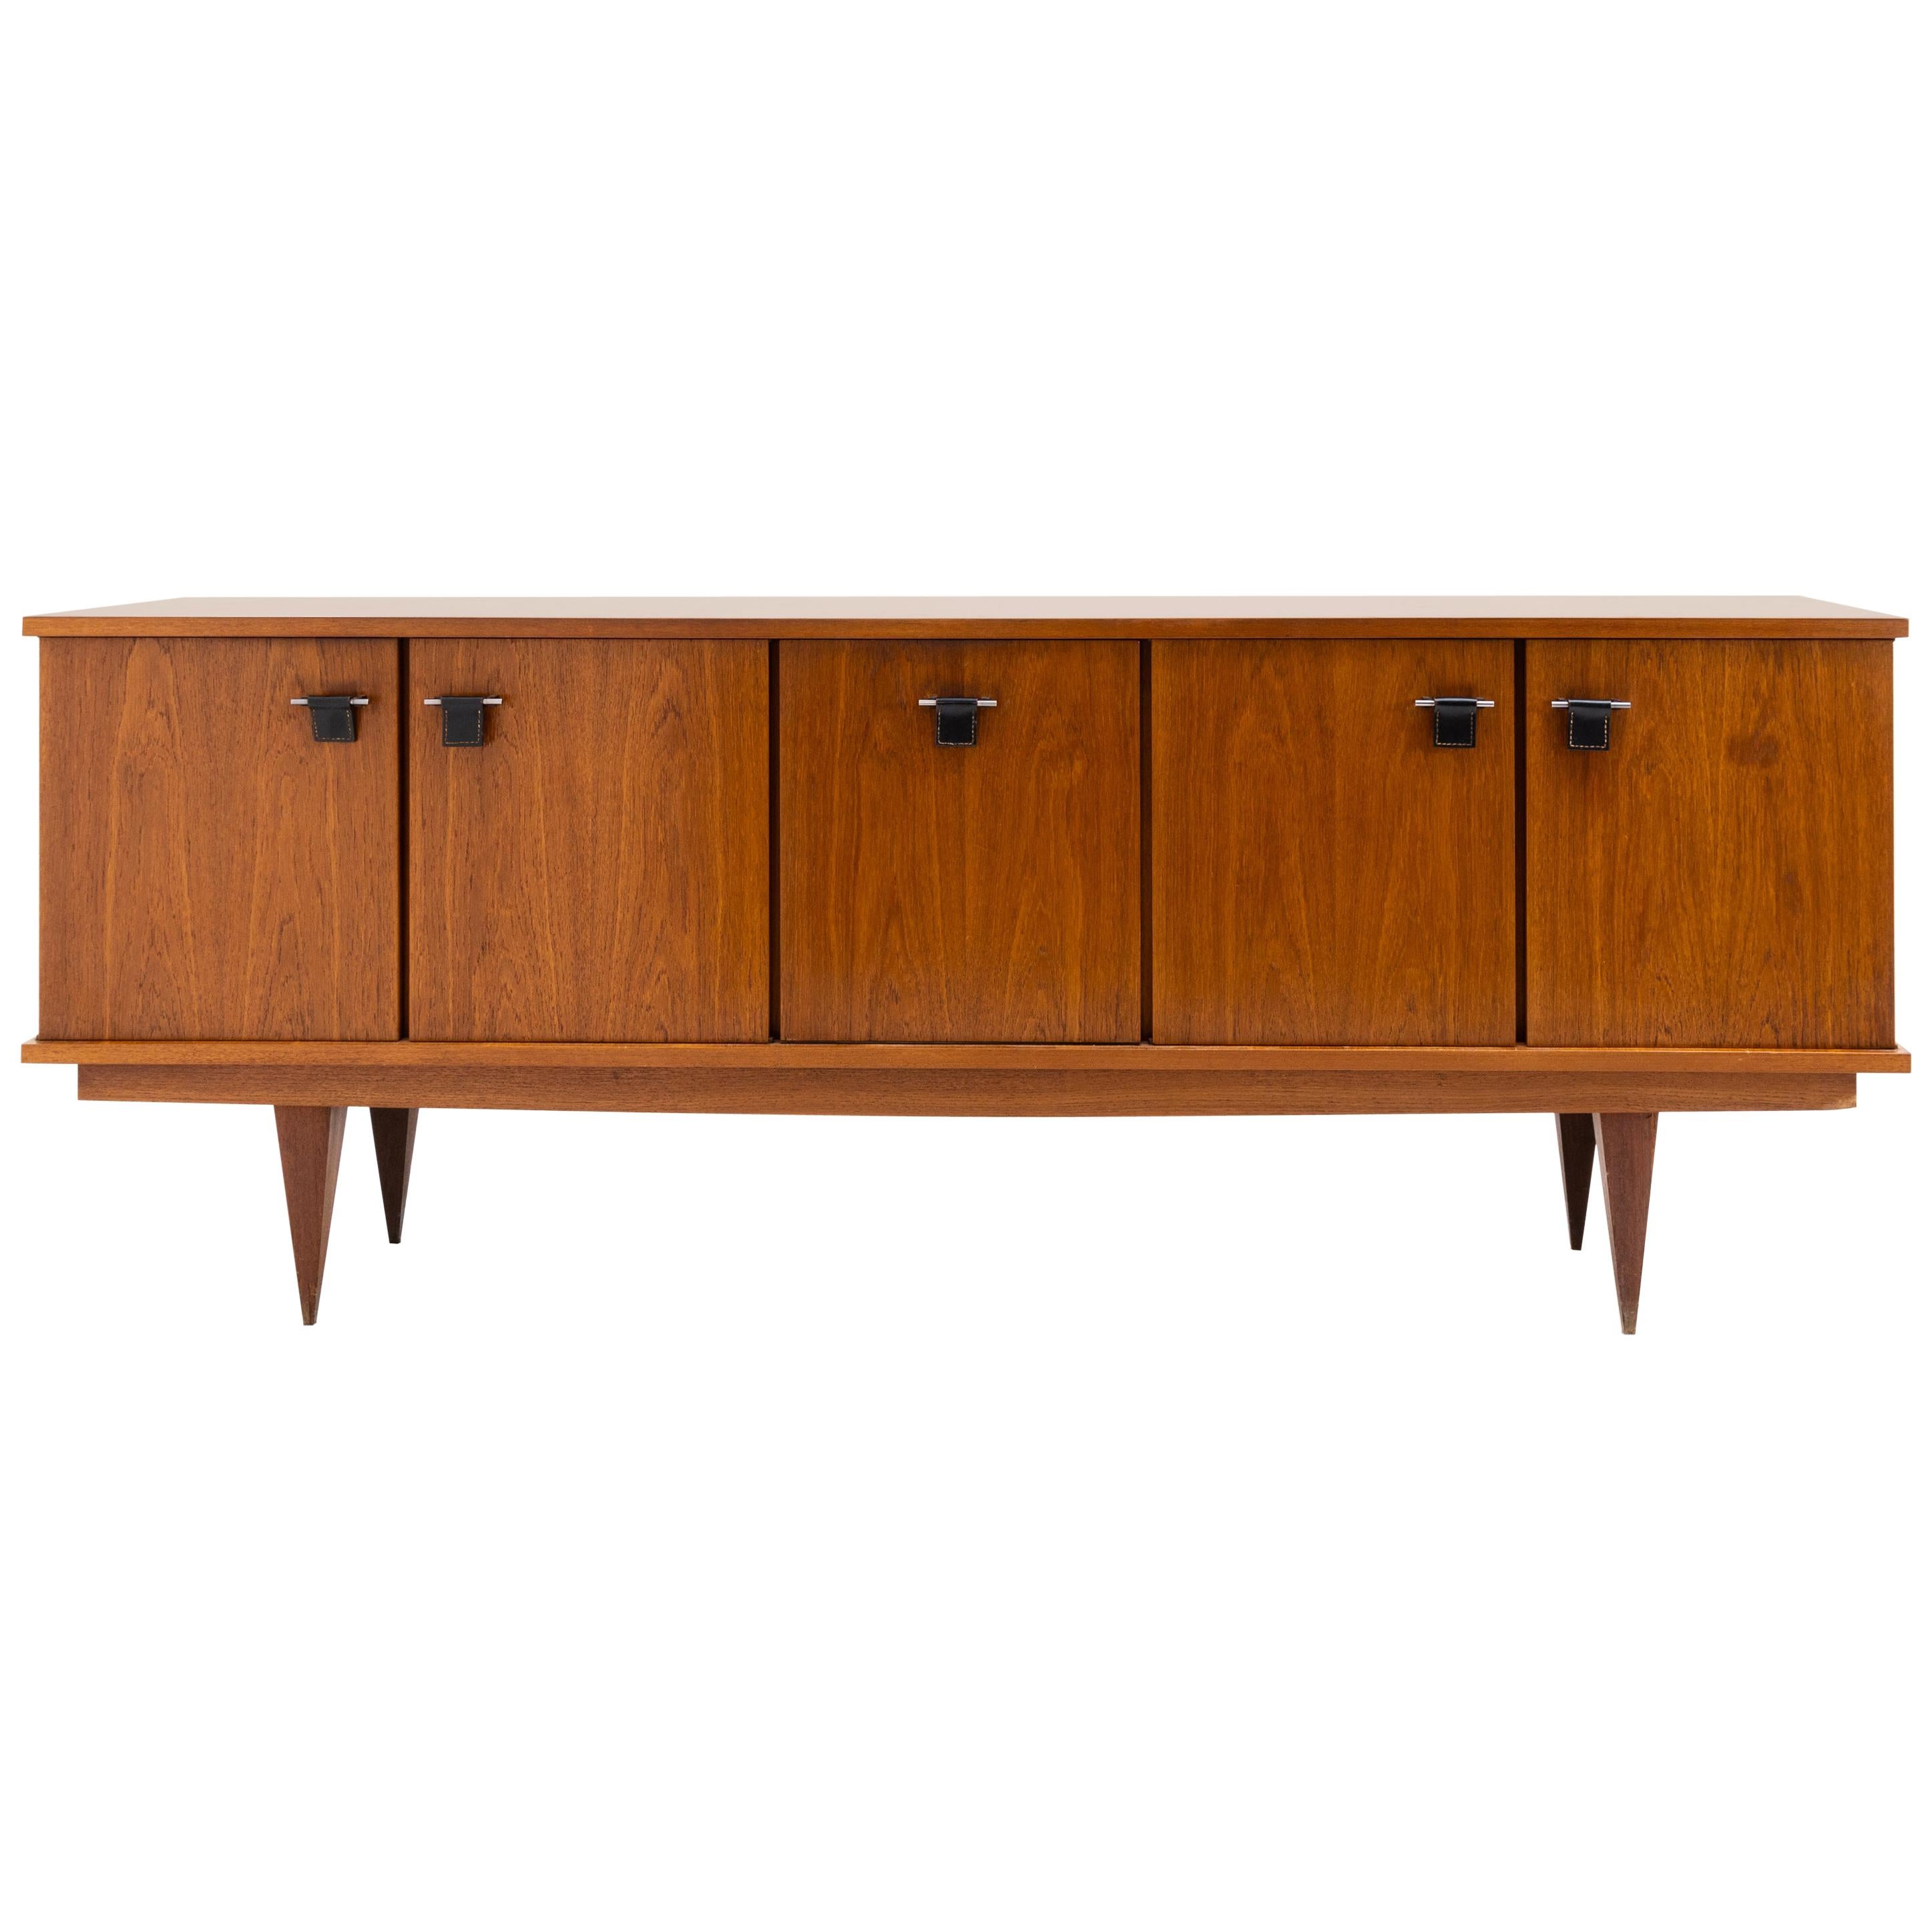 Sideboard, Malora / Ameublement NF, France, 1960s